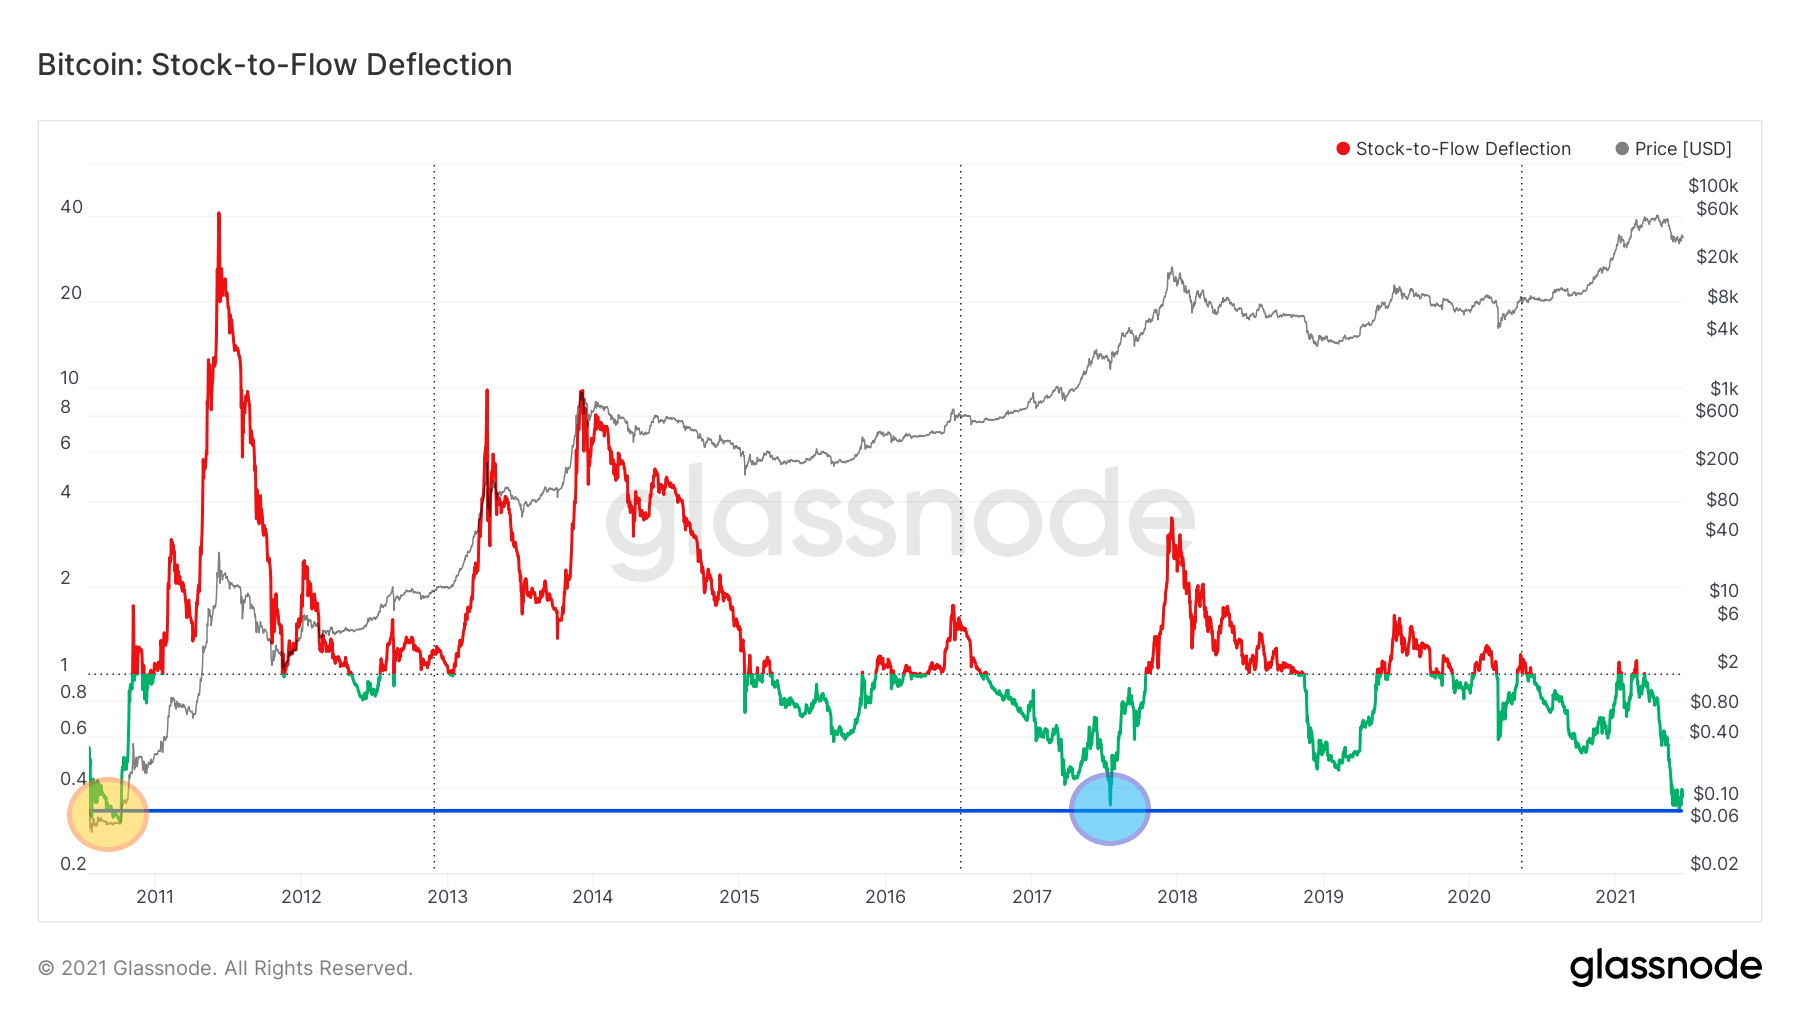 BTC (BTC) Most Undervalued in 10 Years According to Stock-to-Flow Model